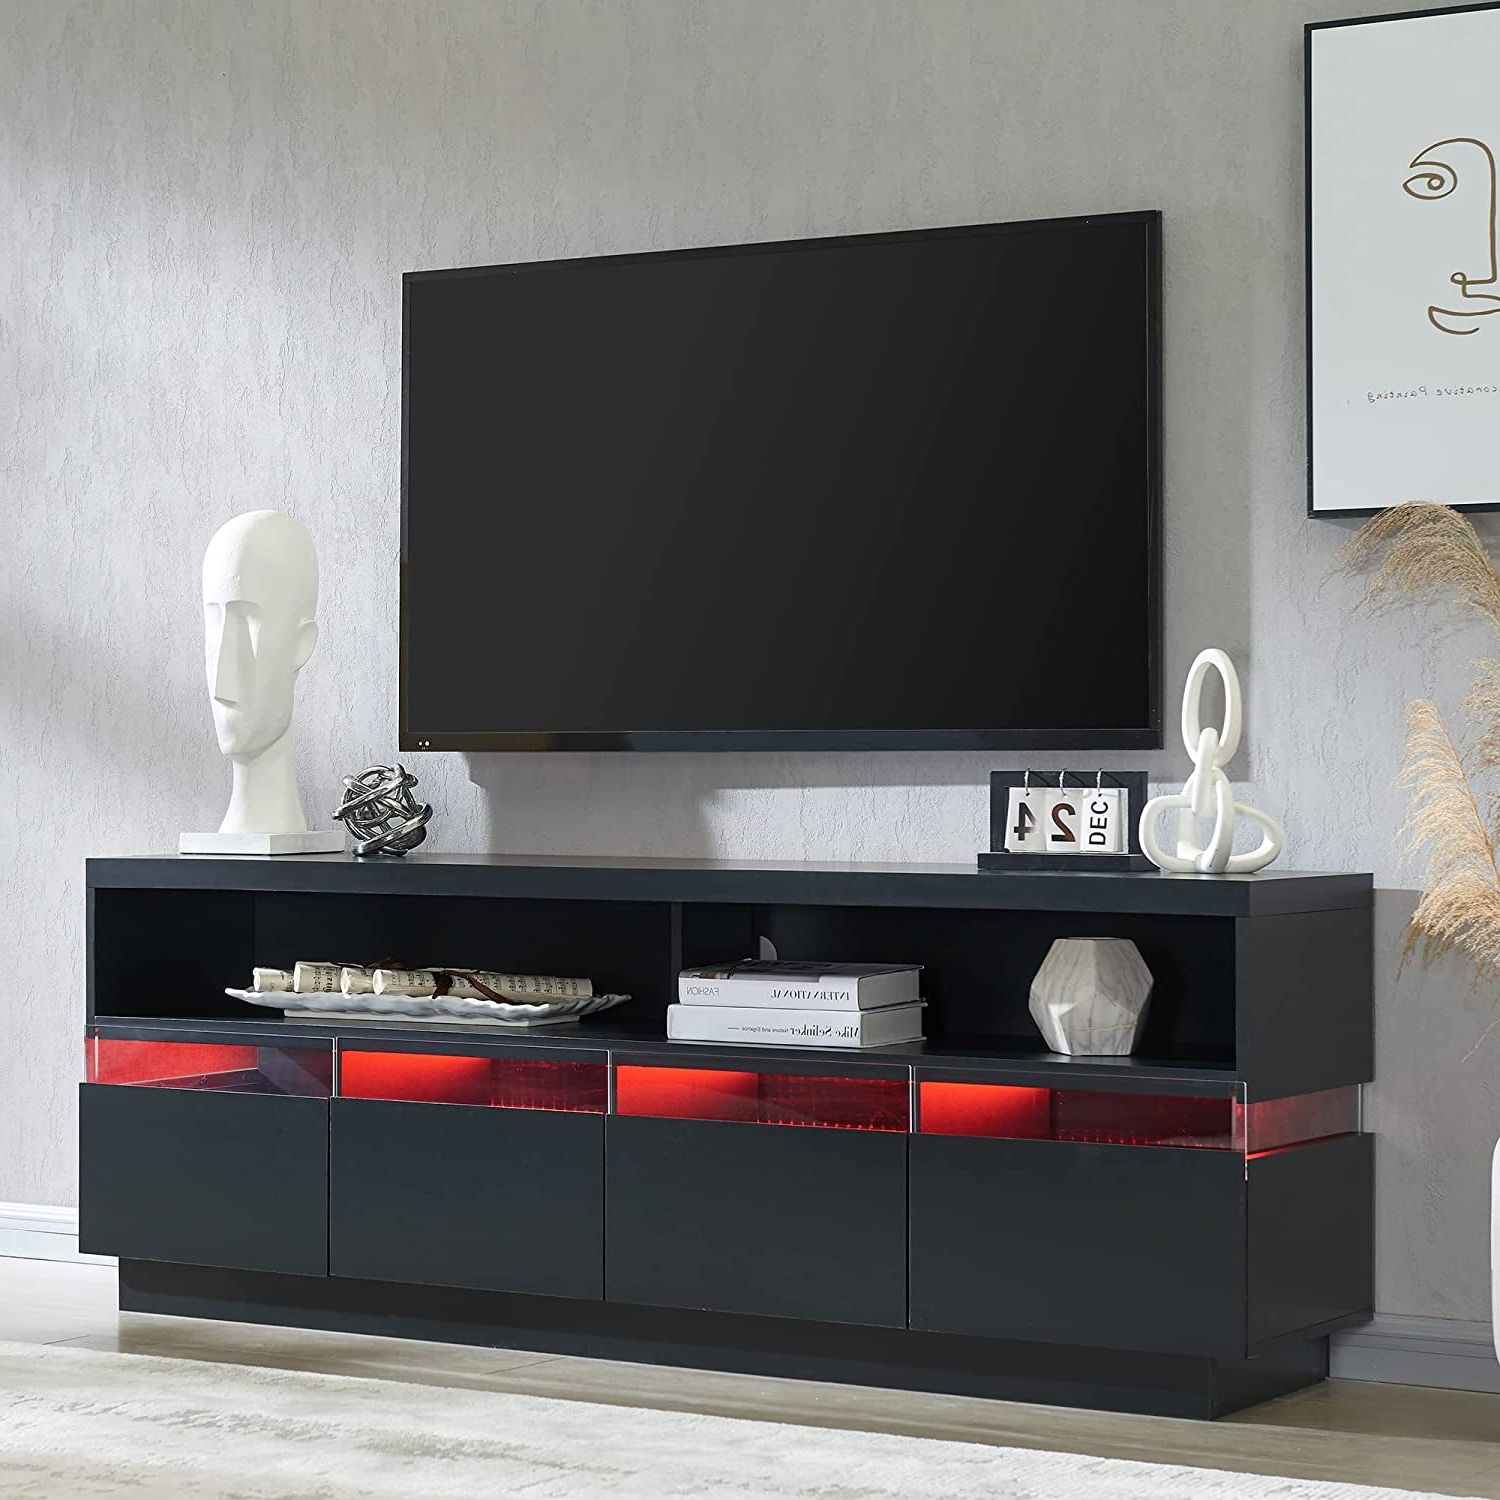 Okd Tv Stand For Tvs Up To 75", Entertainment Center, With Rgb Led Lights  And Storage Shelves For Living Room,solid Black – Walmart Regarding Black Rgb Entertainment Centers (Gallery 7 of 20)